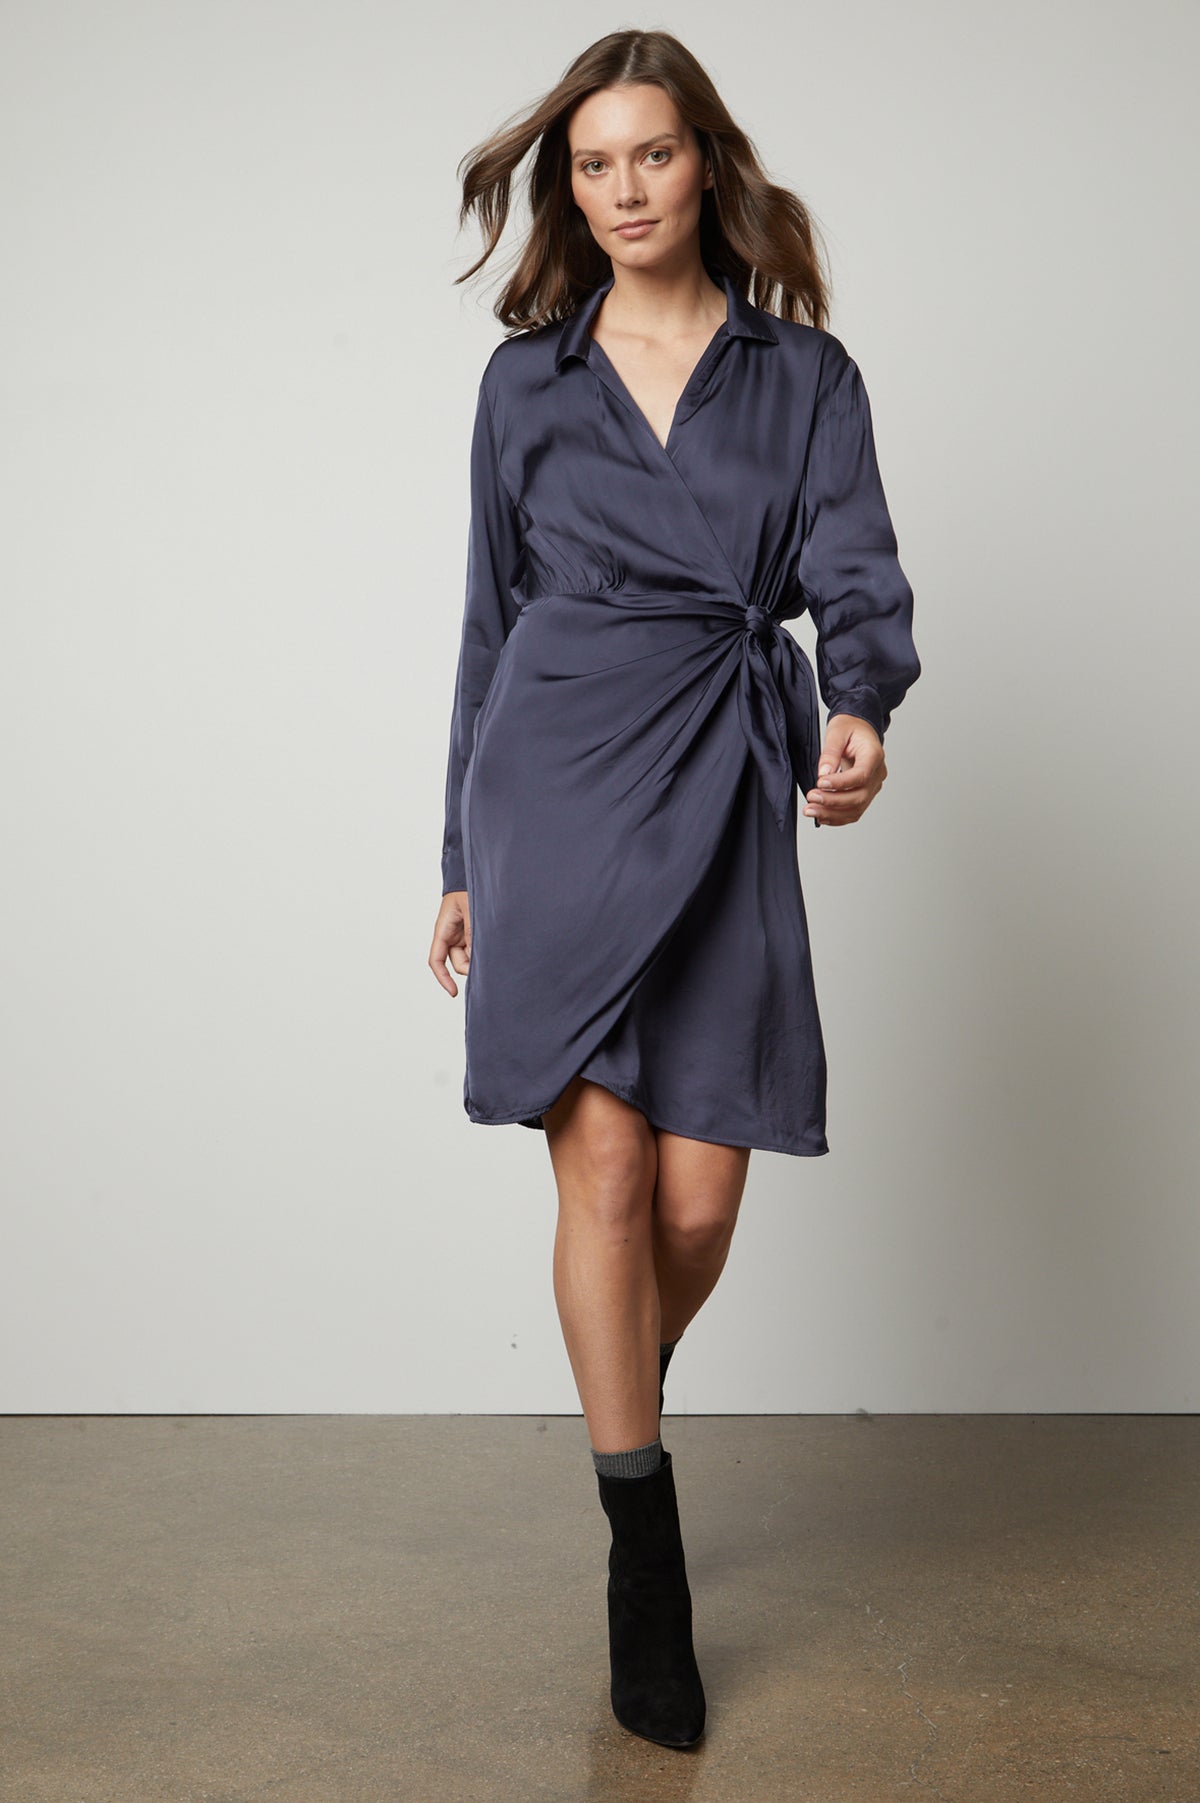   The model is wearing a Velvet by Graham & Spencer JUNI wrap dress with a satin viscose sheen. 